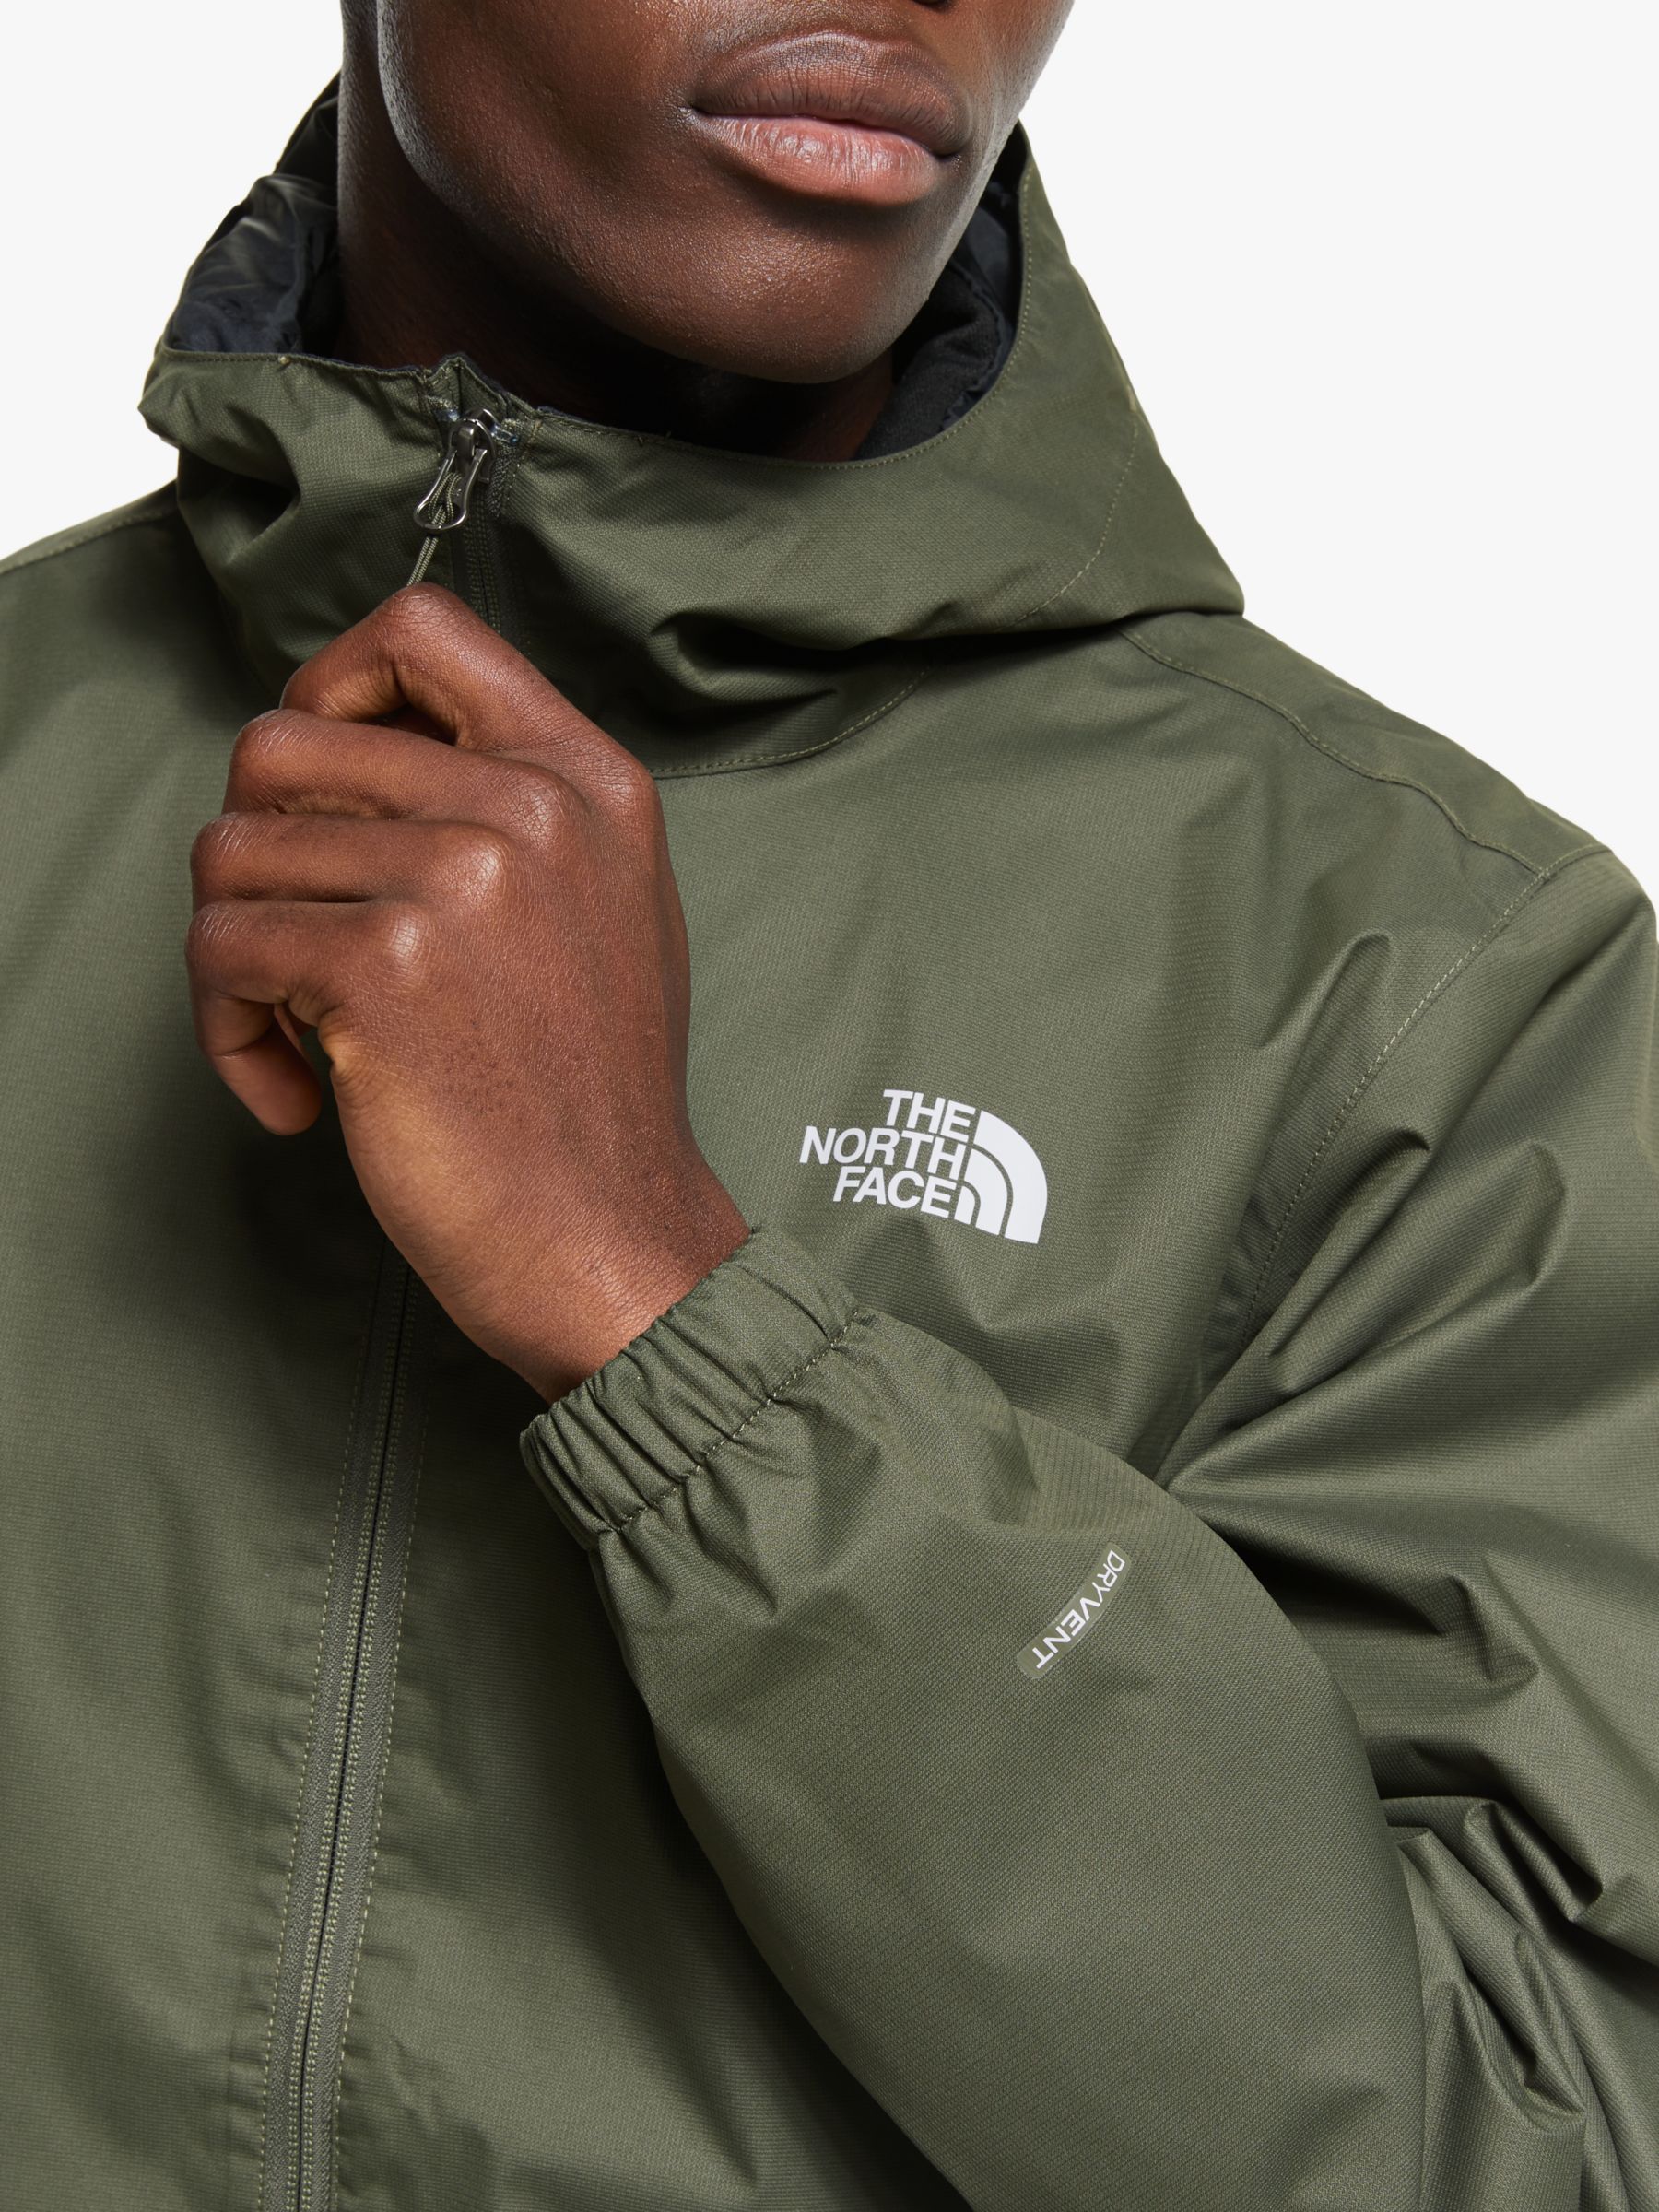 quest jacket north face 